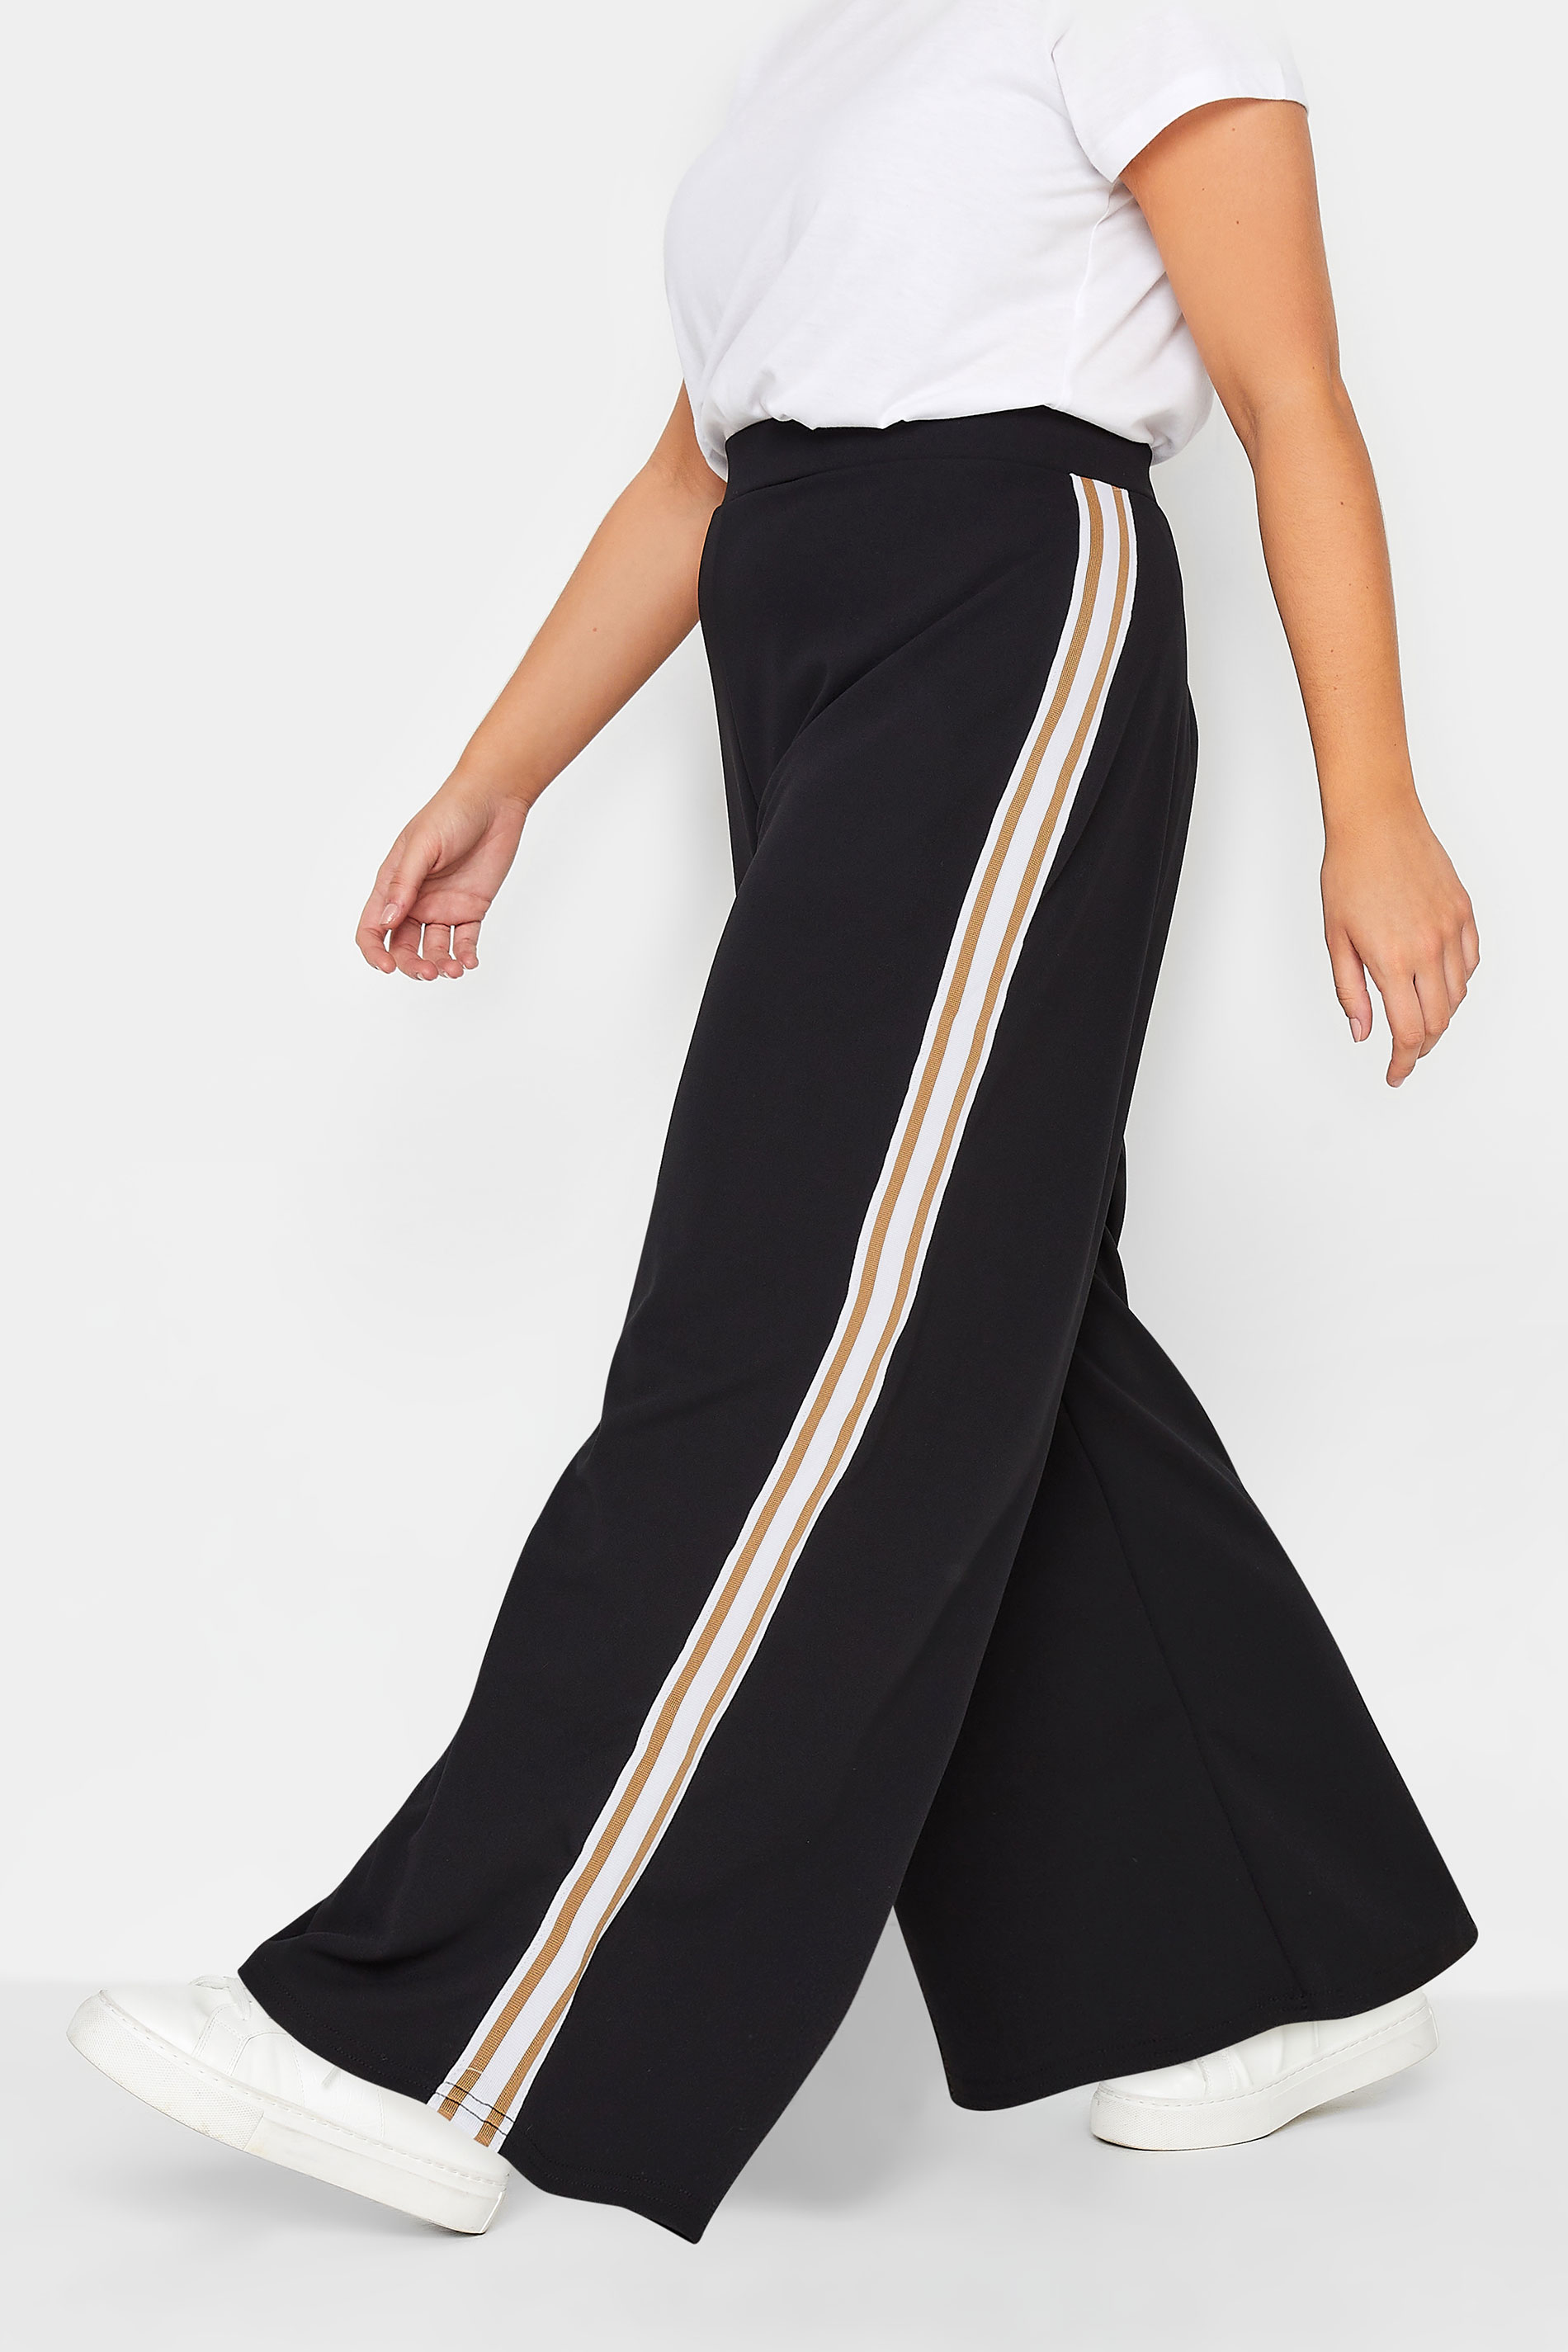 YOURS PETITE Plus Size Black & Brown Block Stripe Wide Leg Trousers | Yours Clothing 1